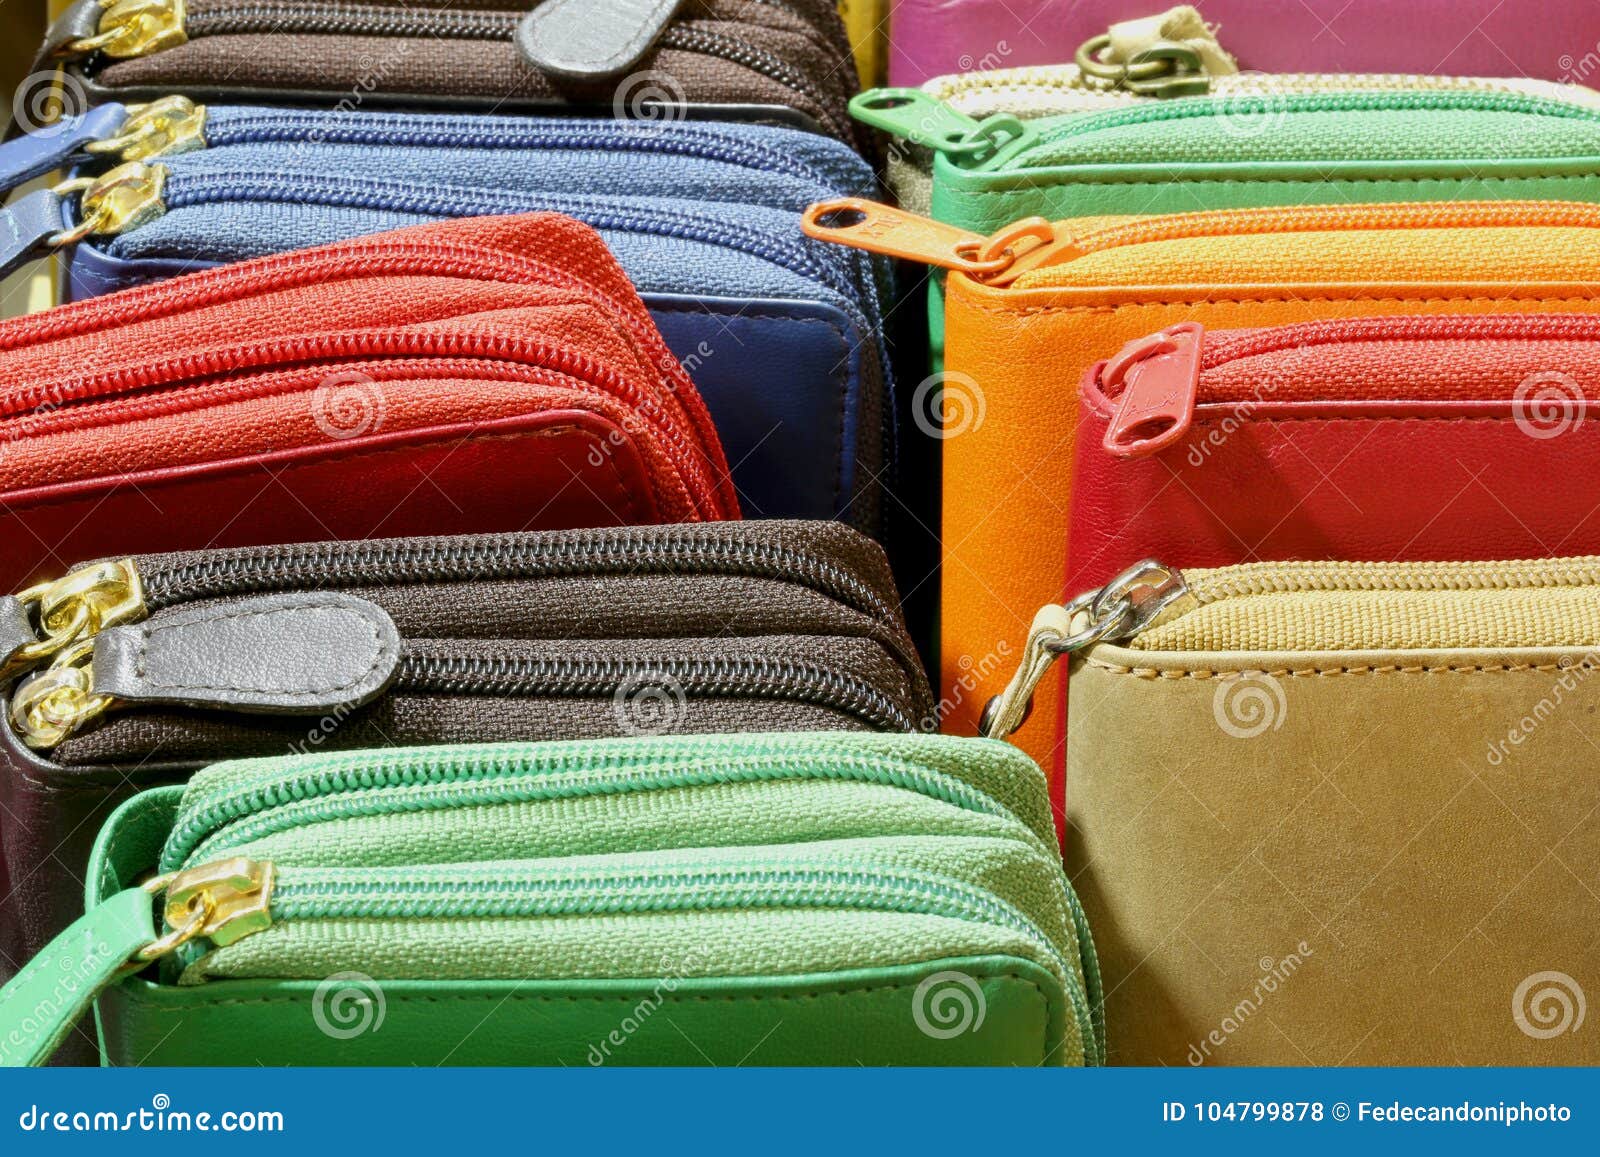 Colored Leather Wallets with Zip on Sale in Leather Goods Stock Photo ...